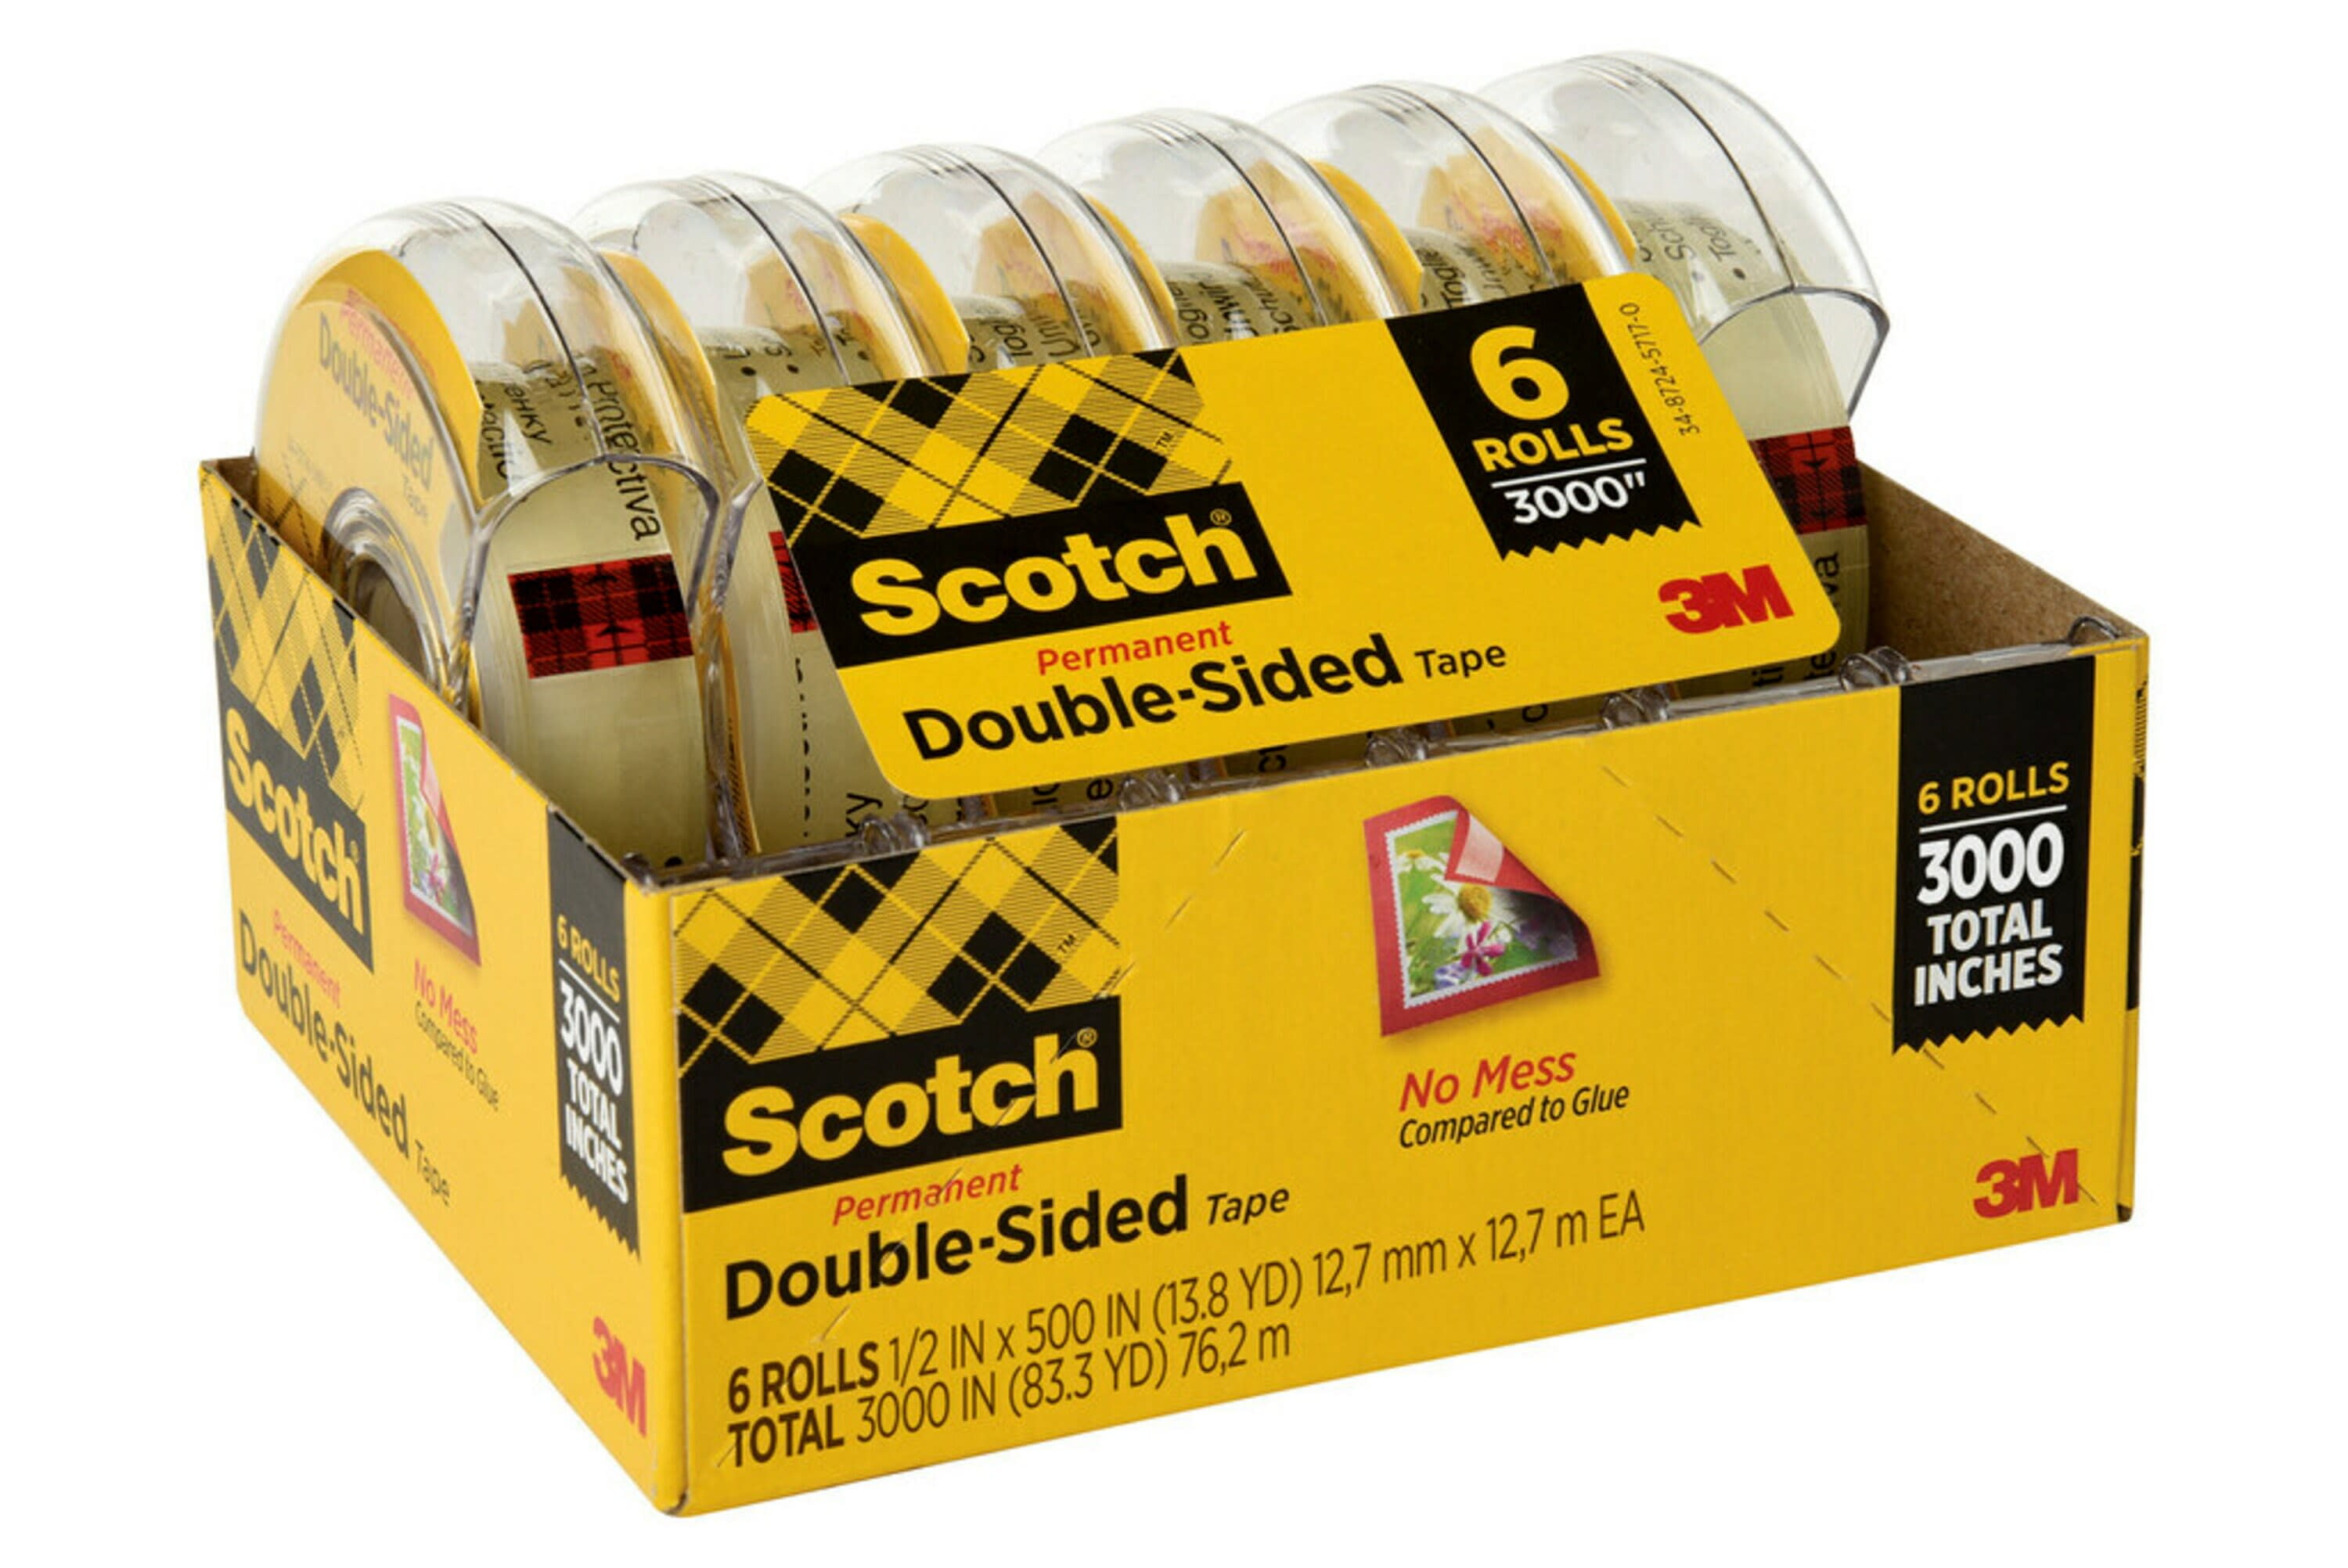 Scotch Double Sided Tape, 0.5 in. x 500 in., 6 Tape Rolls With